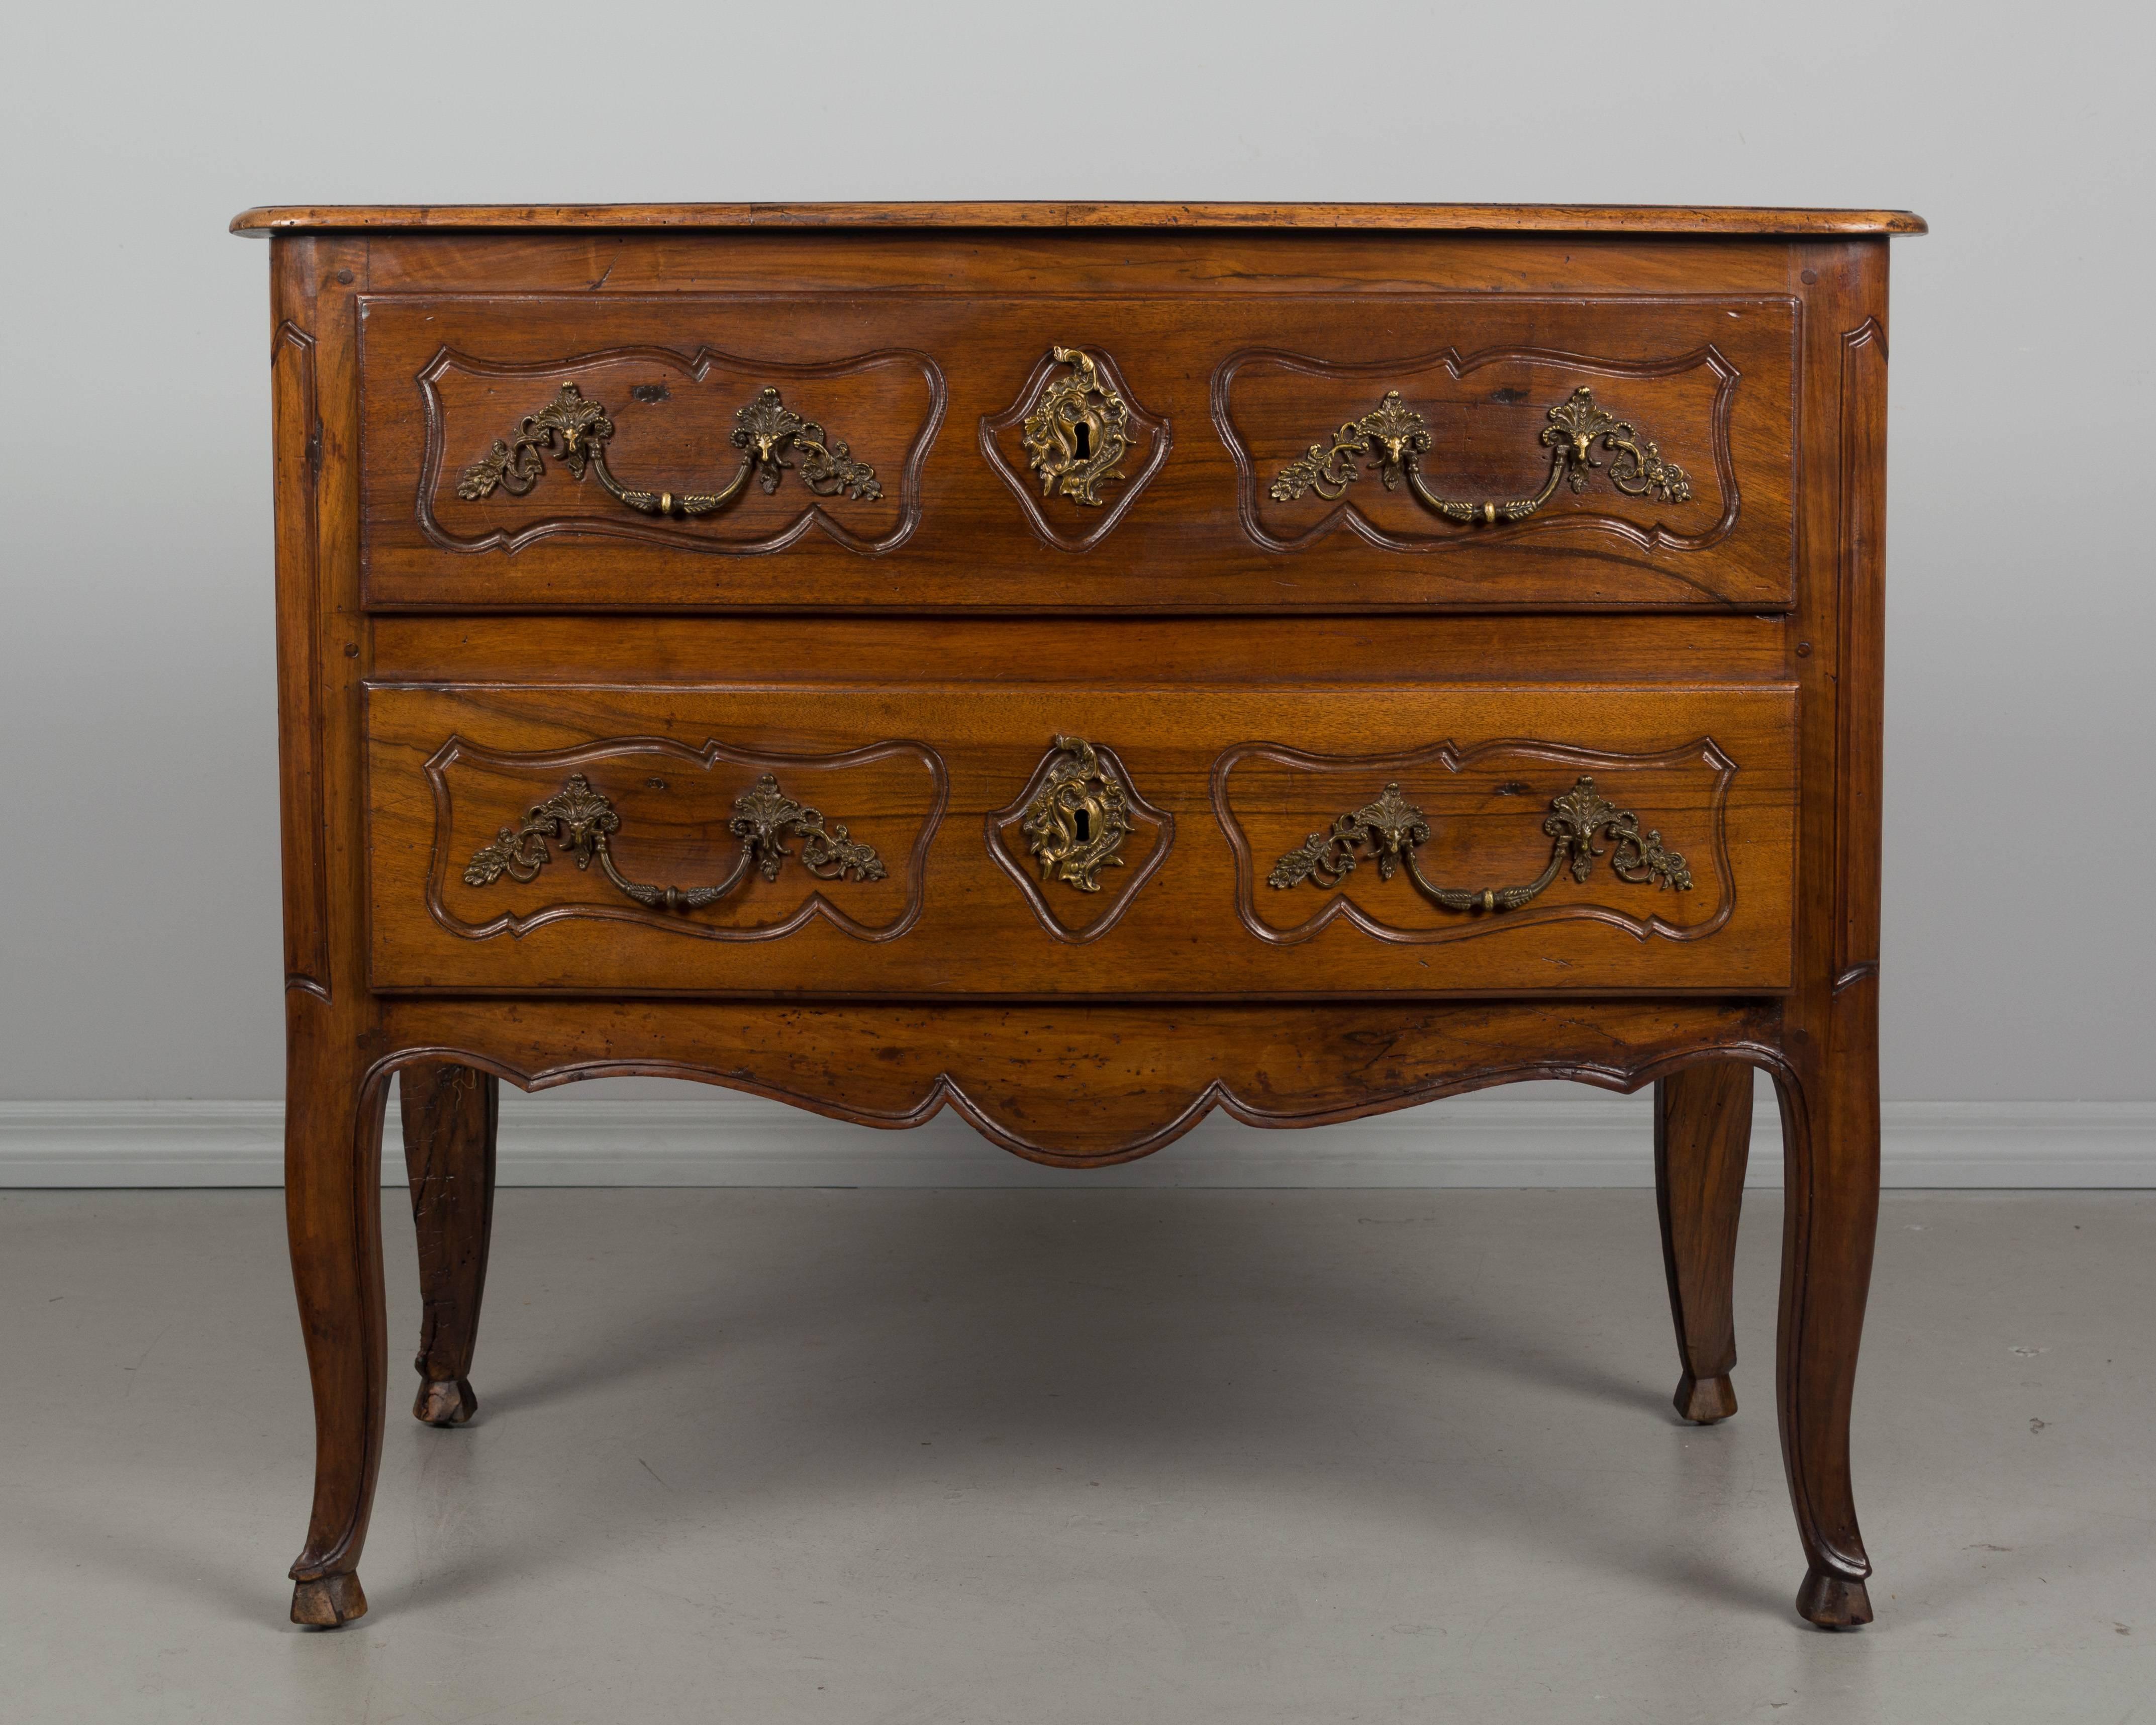 A 19th century Louis XV style commode from the South of France made of solid walnut with pegged construction and waxed finish. Two dovetailed drawers with brass hardware that is of the same period, but not original to the piece. Locks are present,